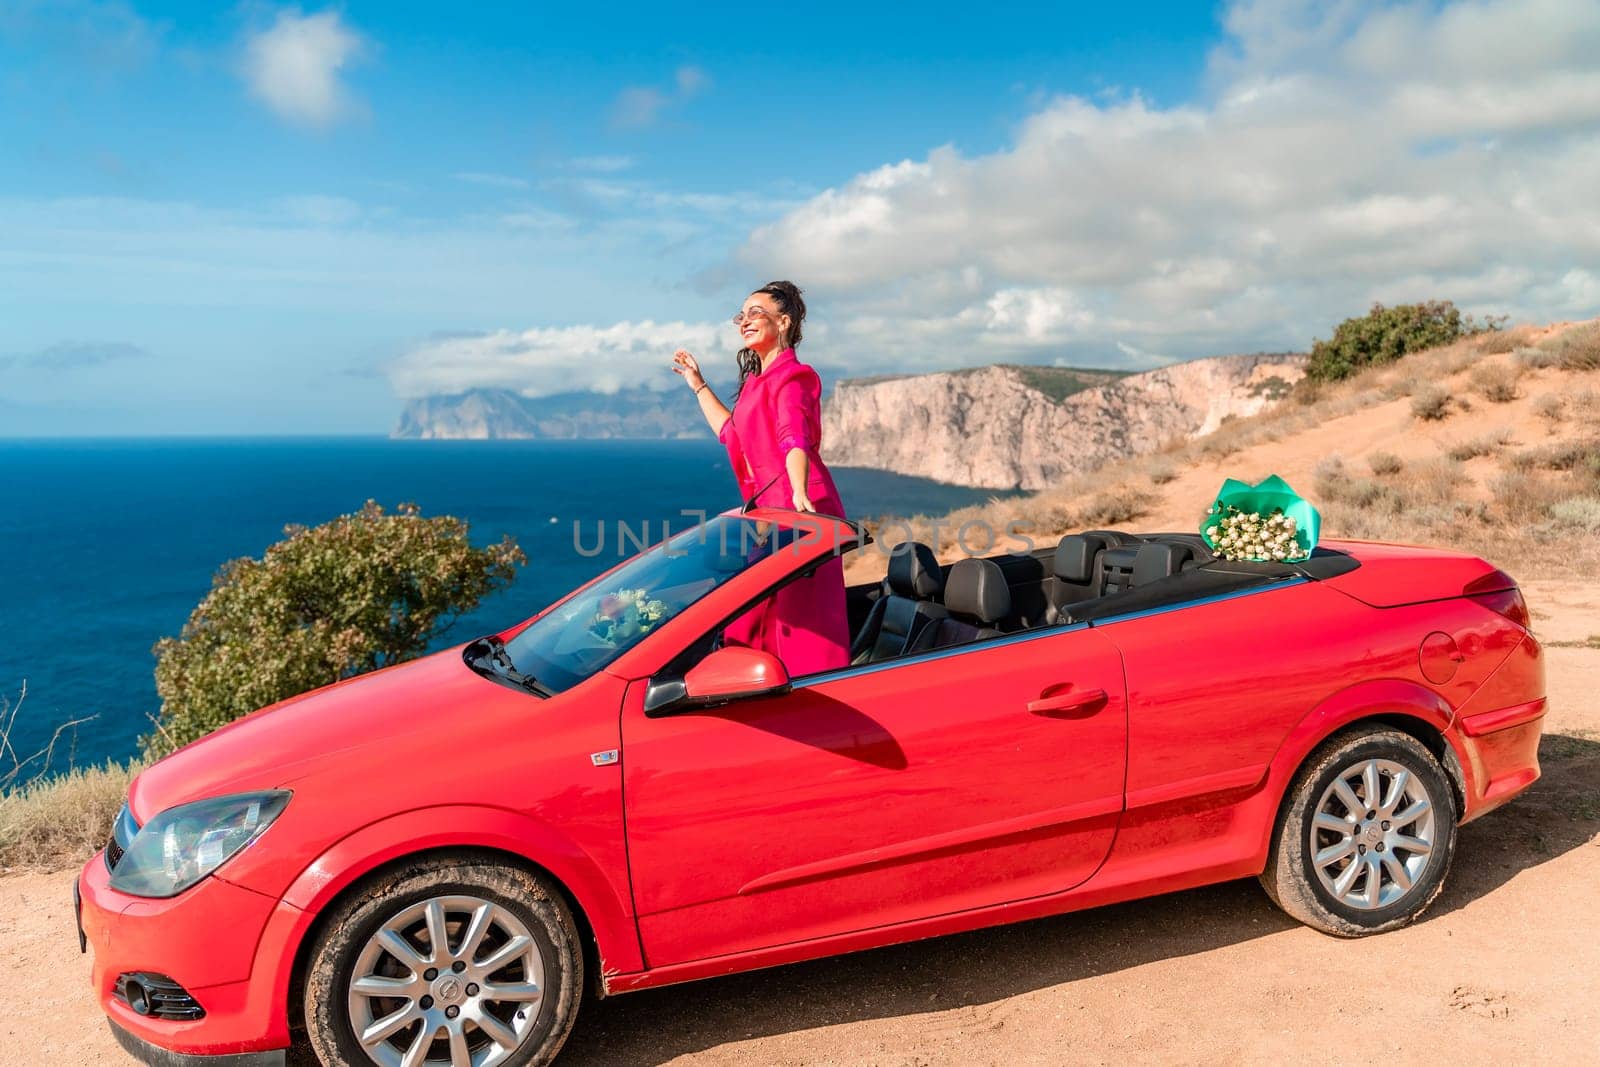 A woman is posing on top of a red car. She is wearing a pink suit and sunglasses. by Matiunina